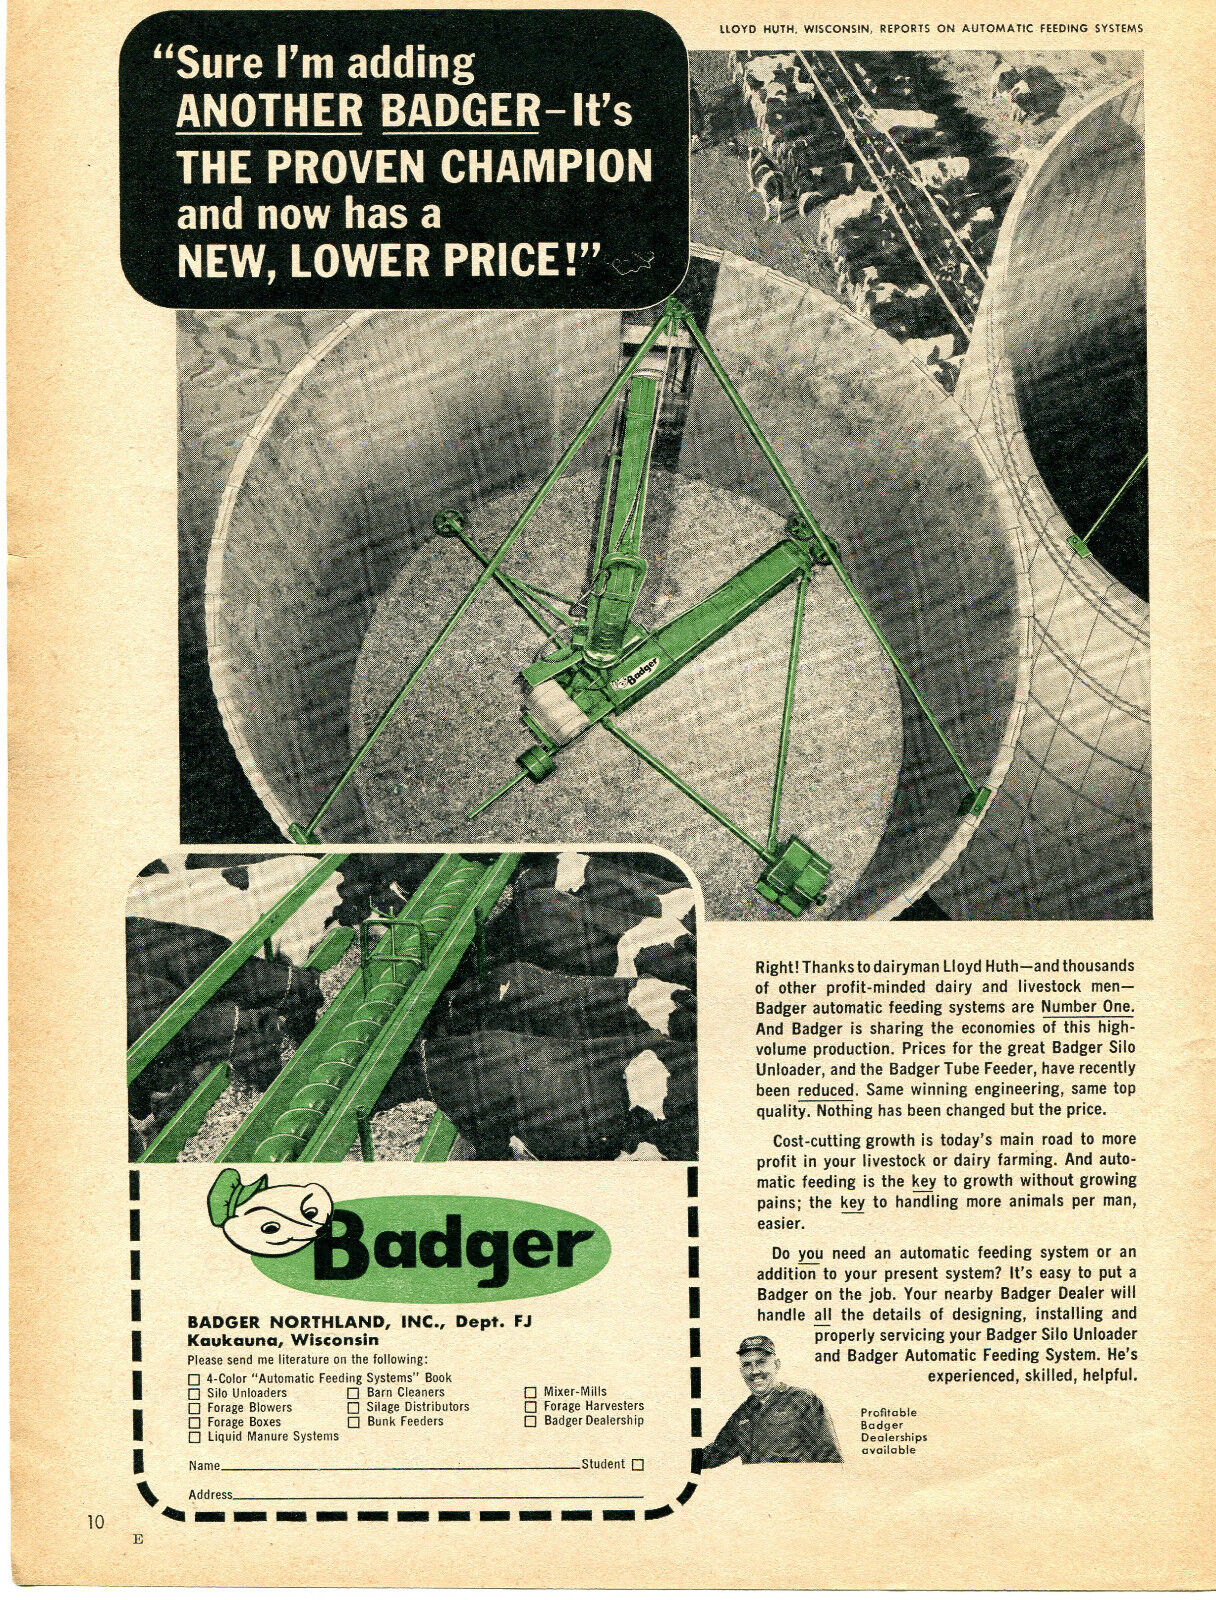 1965 Print Ad of Badger Northland Automatic Cattle Feeding System